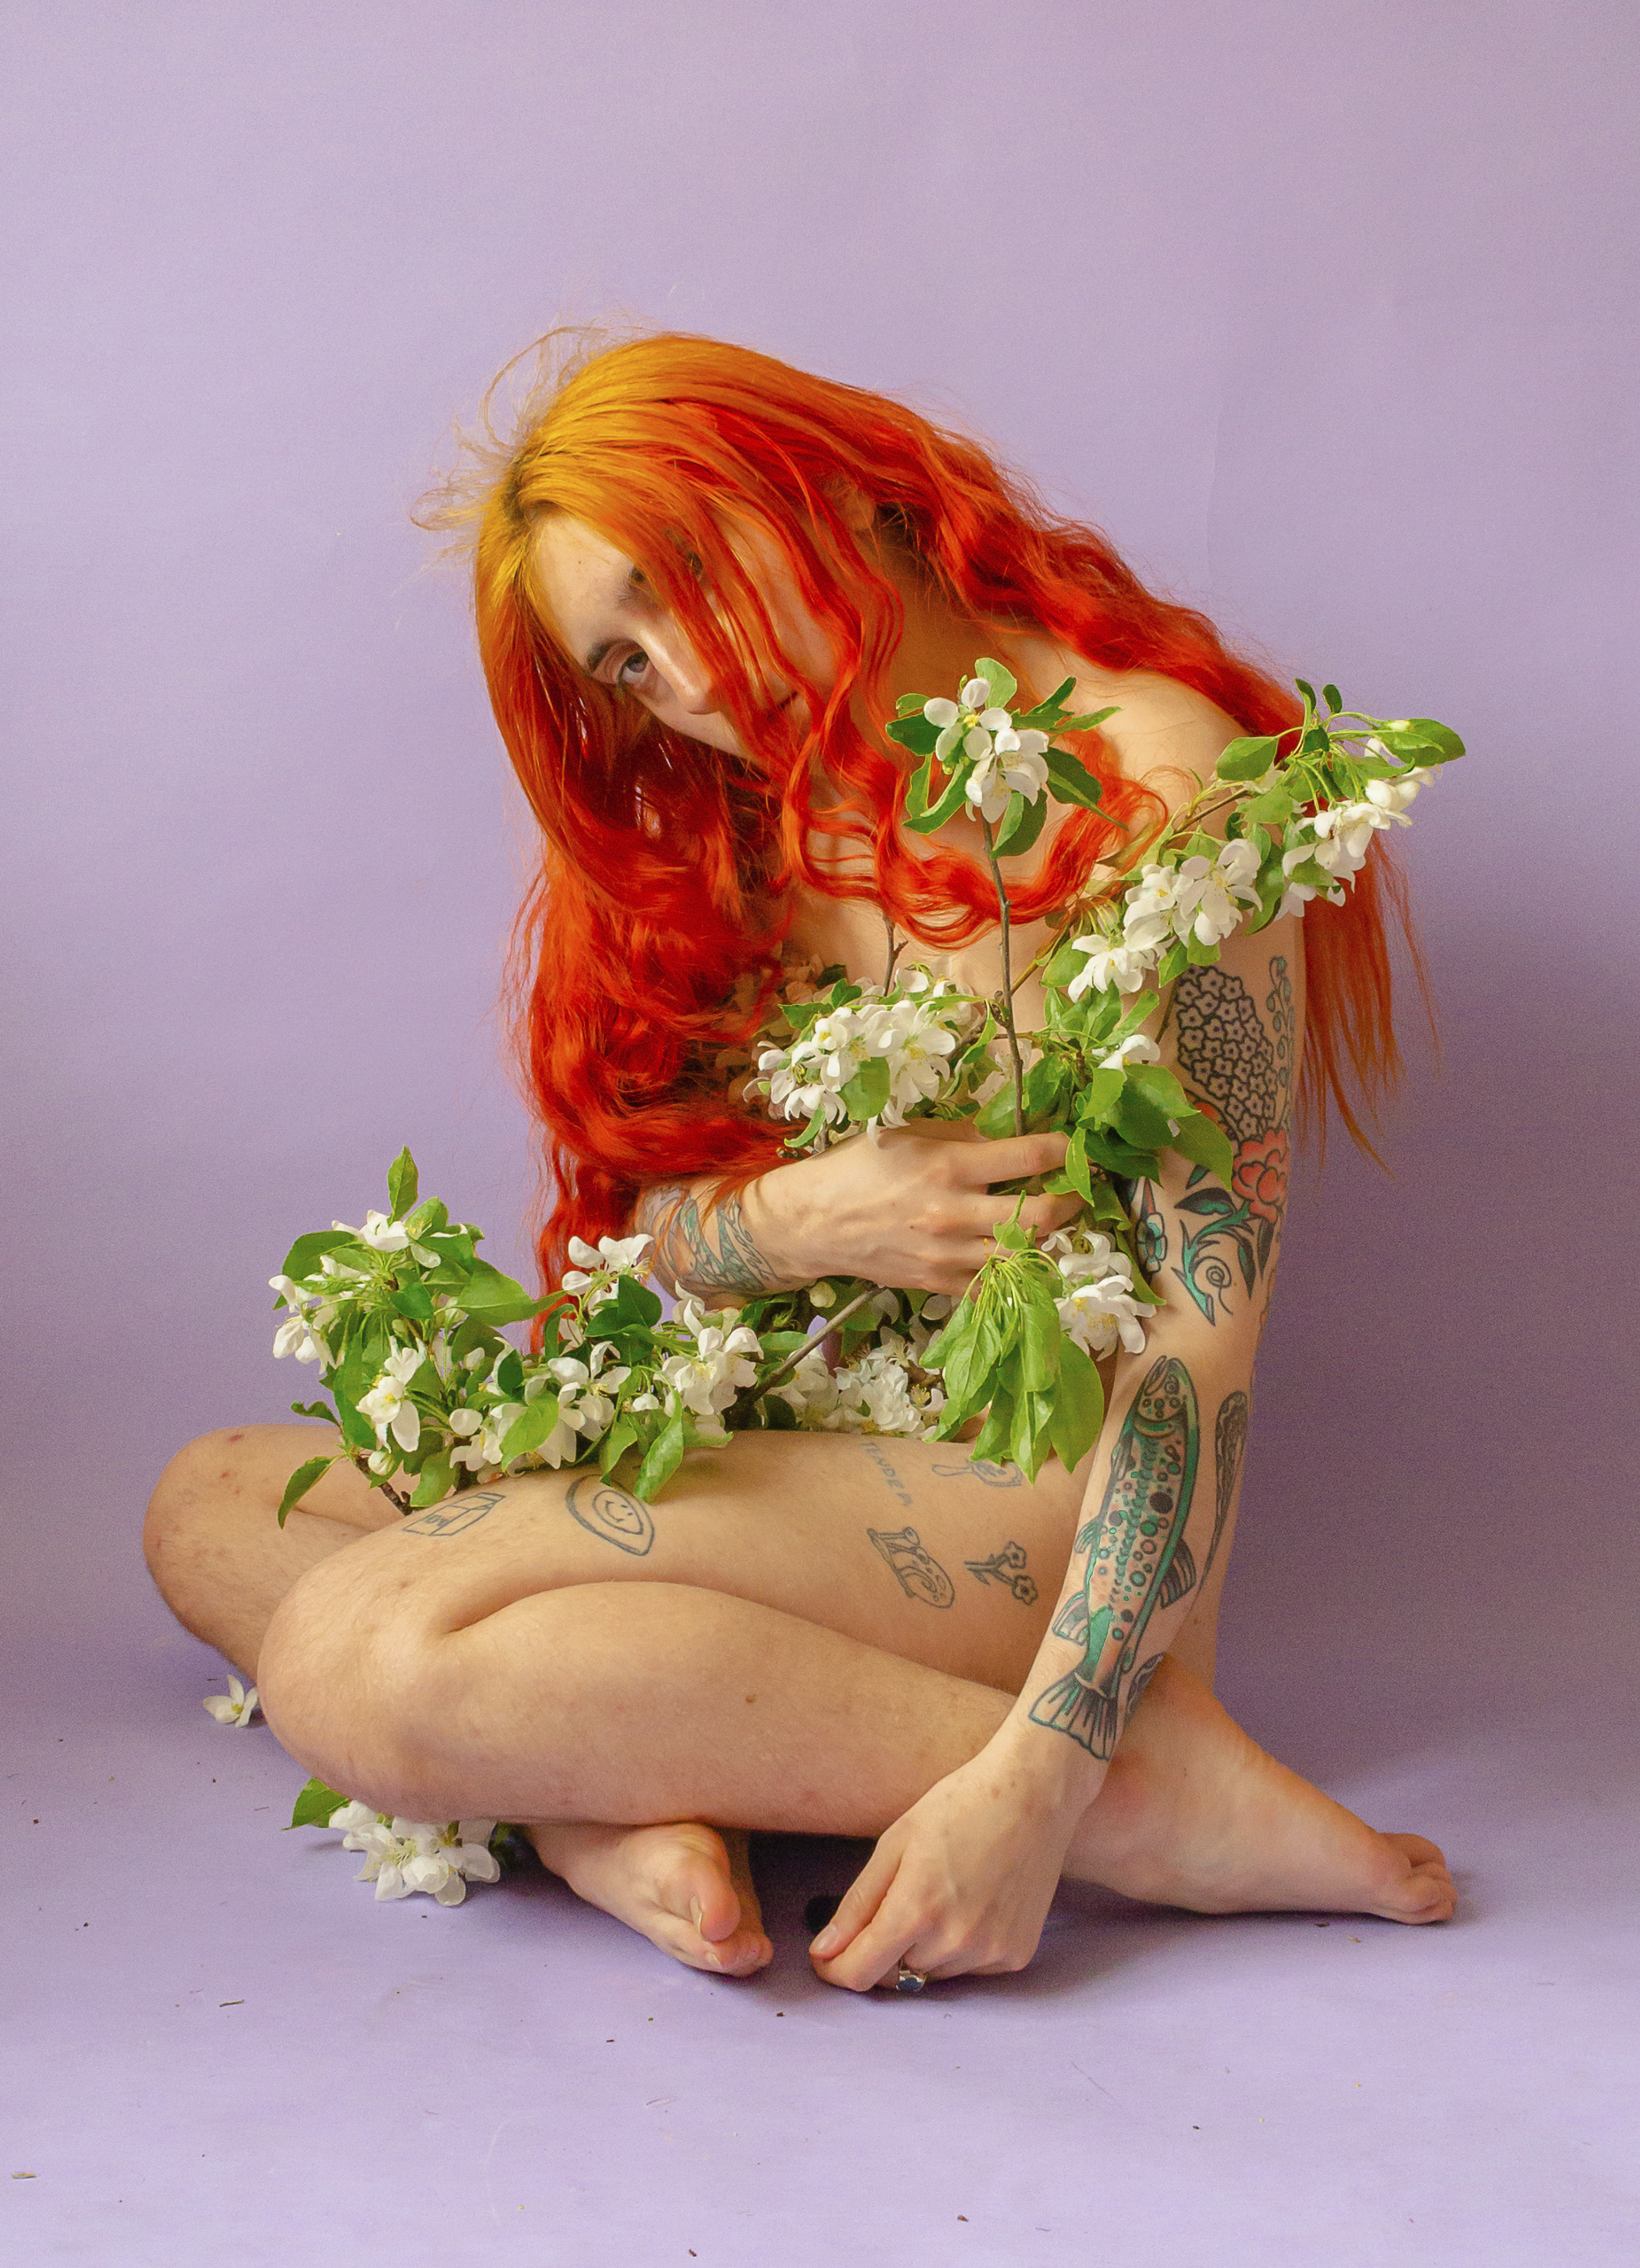 A photograph of a nude red-headed person against a purple background, covering themselves with white flowers